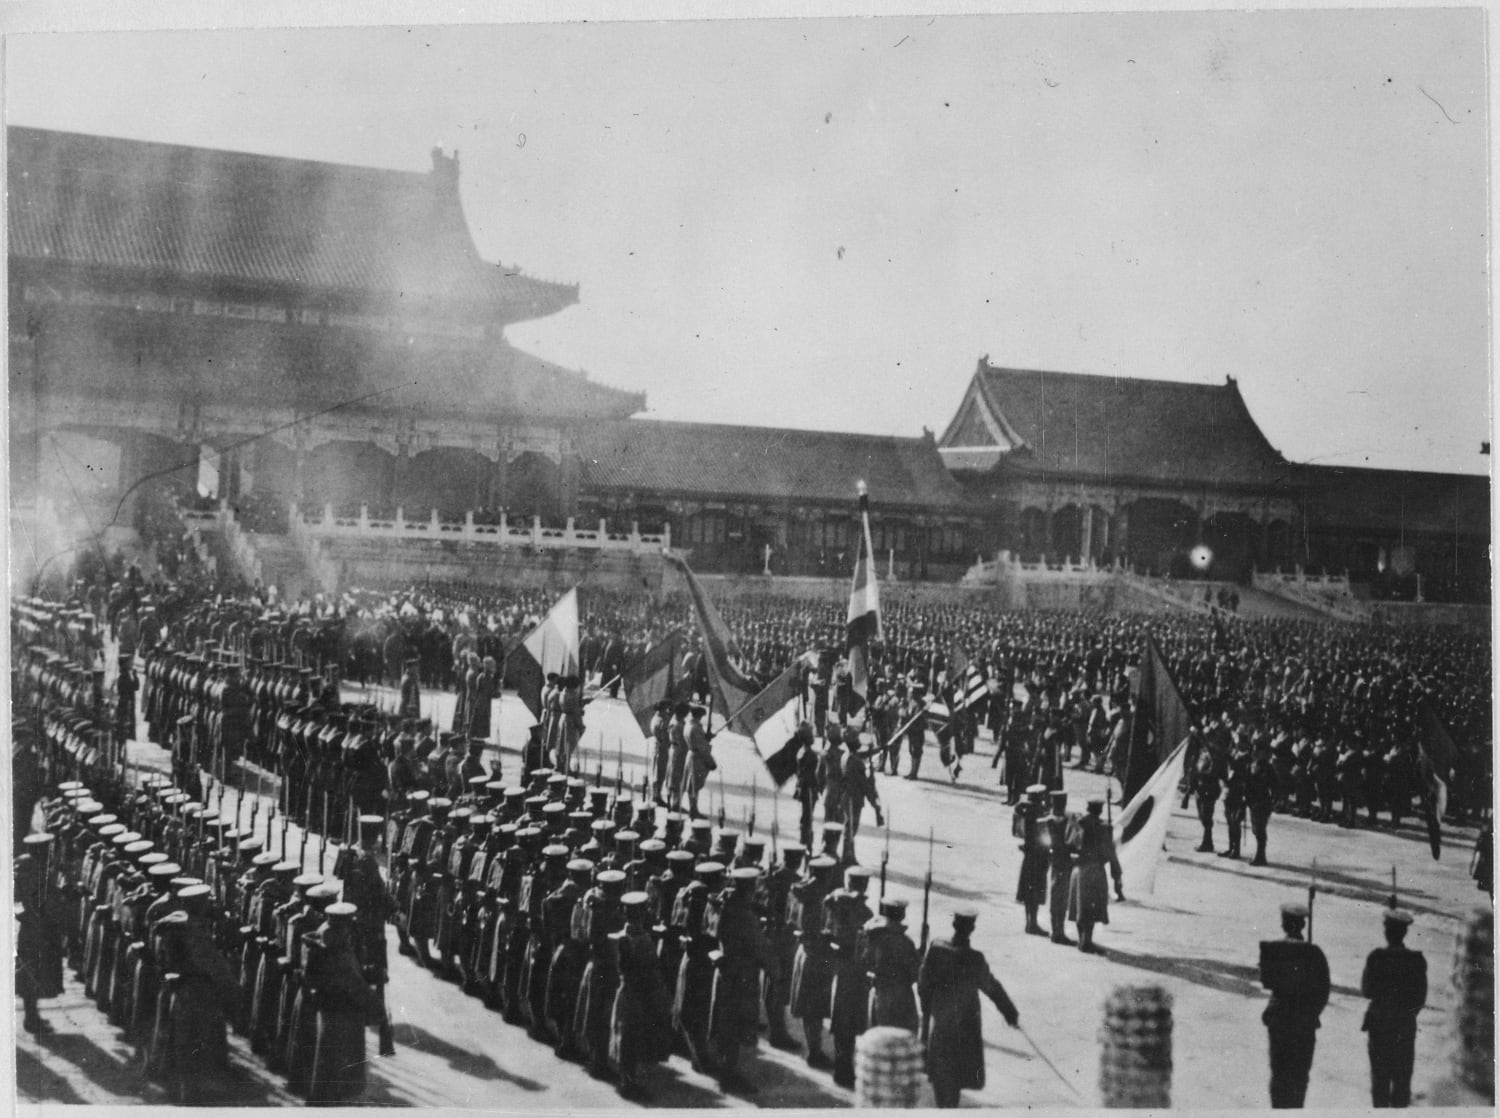 Within historic grounds of the Forbidden City, Eight NAtions troops celebrated victory over Boxers. Beijing, China. November 28, 1900.